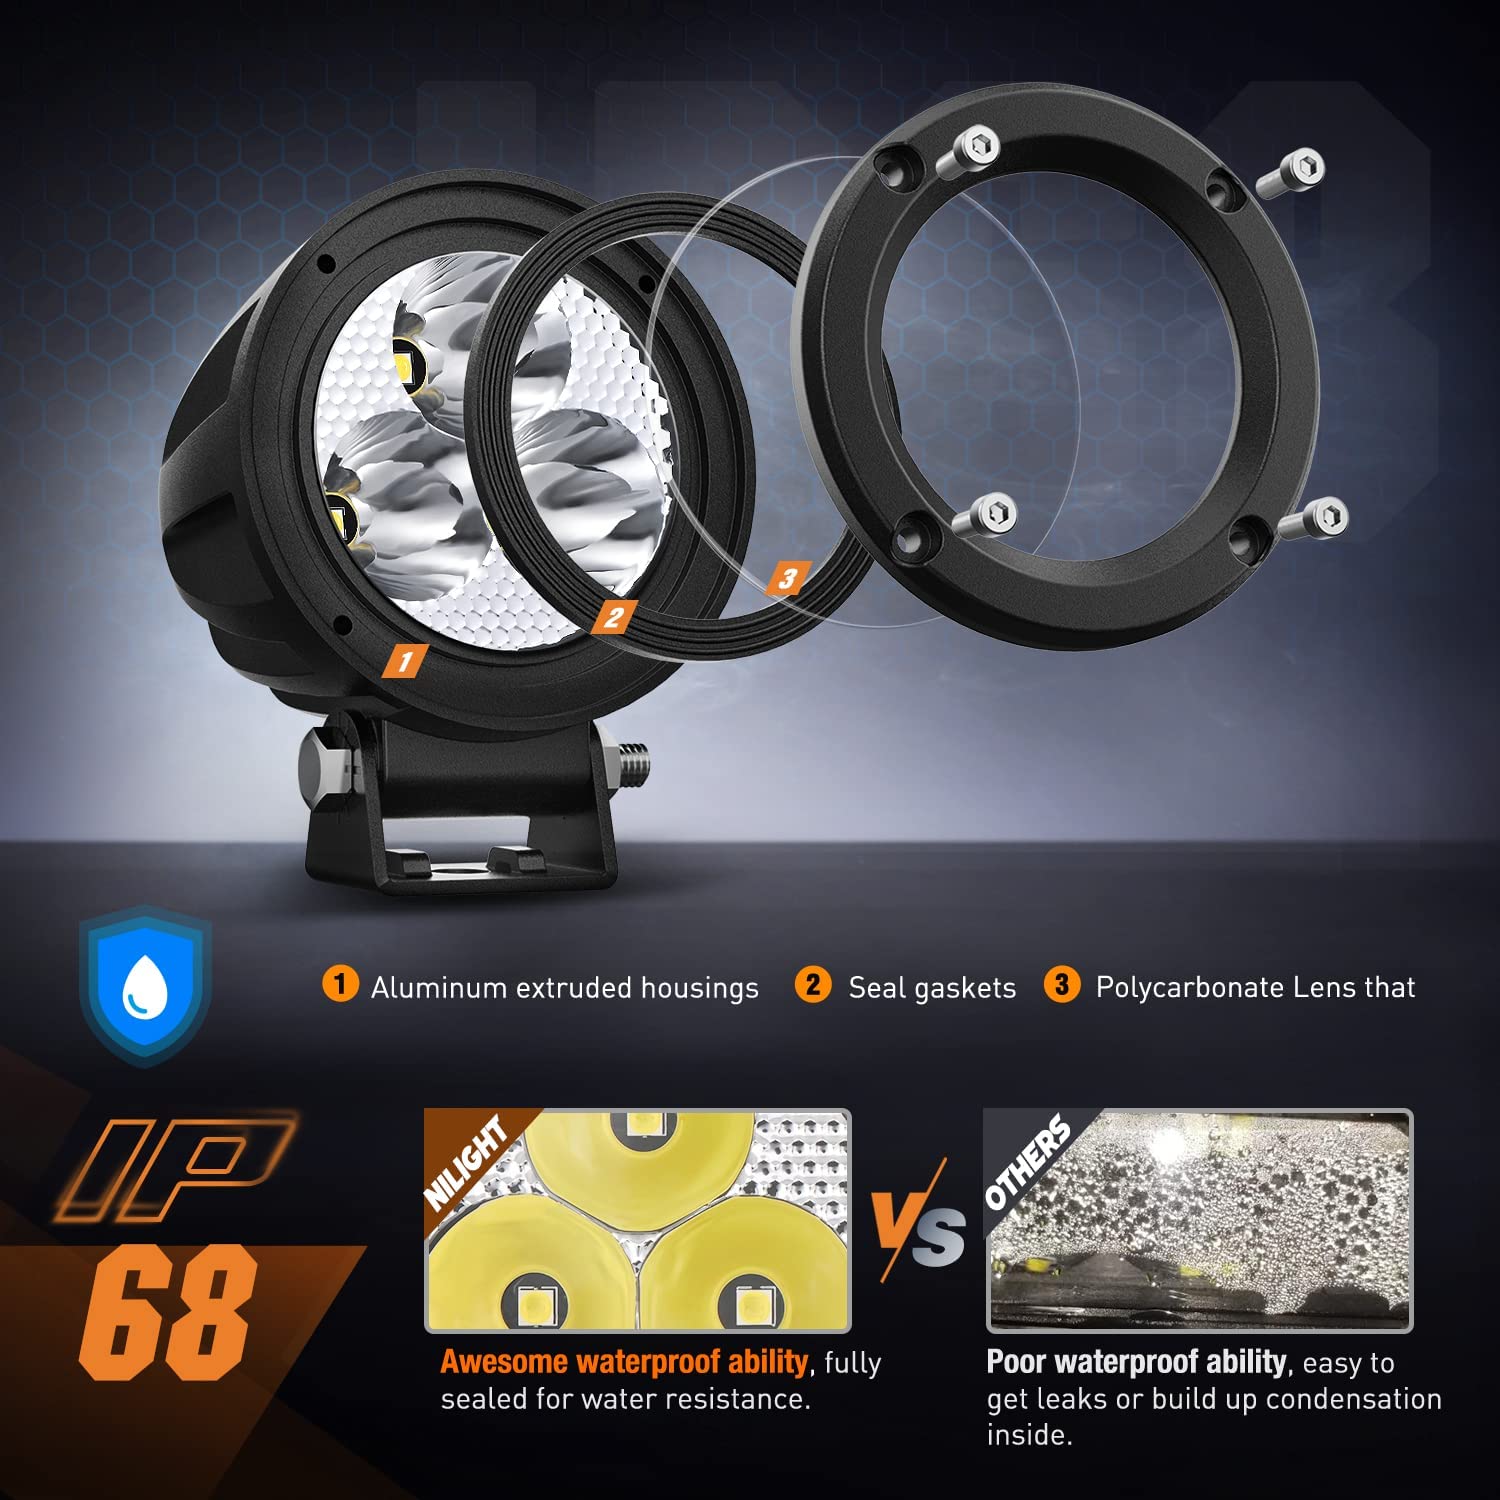 3" 15W 1550LM Spot Round Built-in EMC LED Work Lights (Pair) | 16AWG DT Wire Nilight